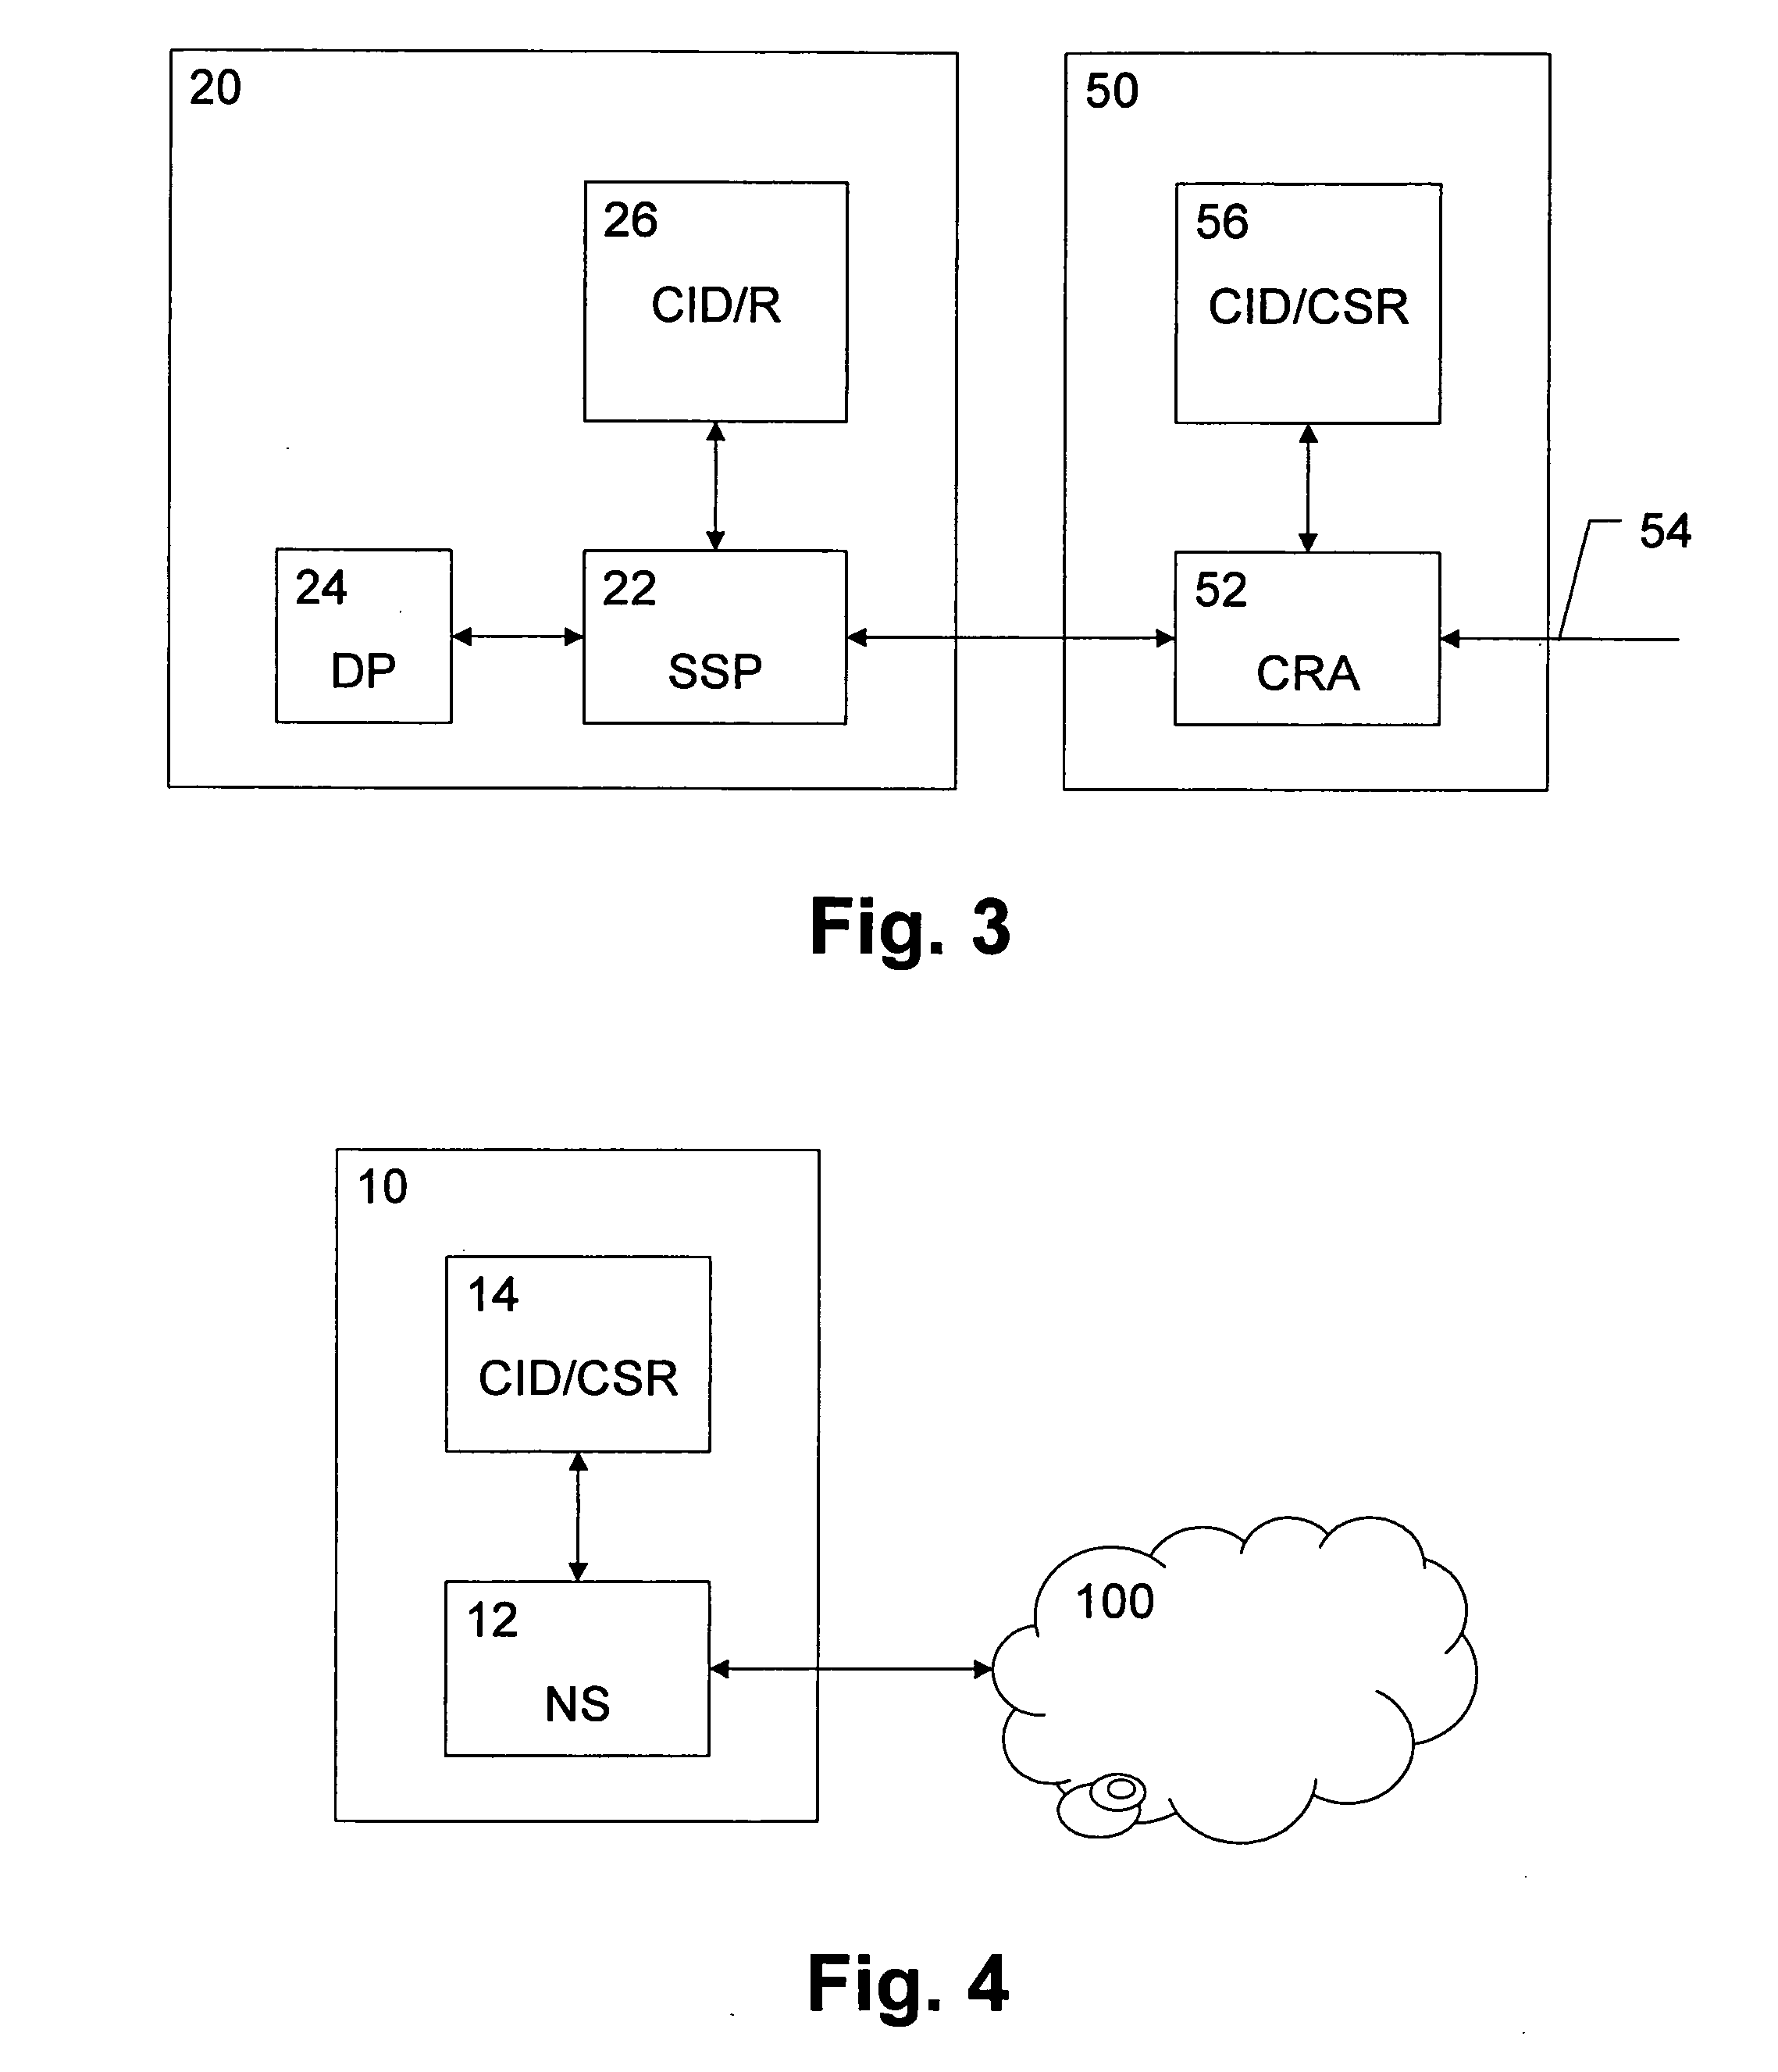 Cell Configuration for Self-Organized Networks with Flexible Spectrum Usage